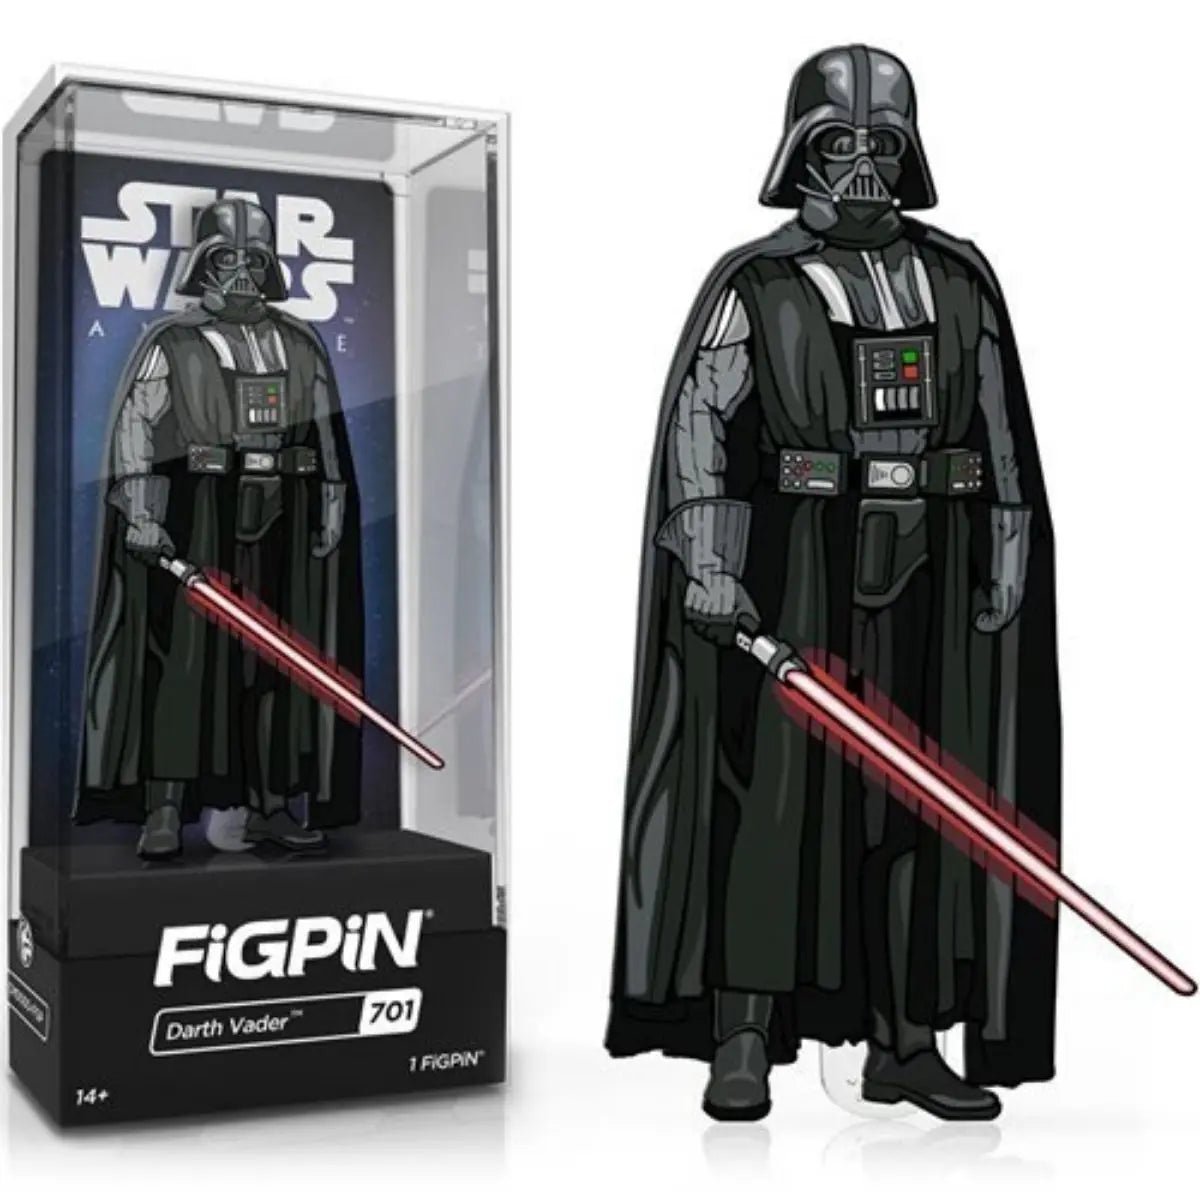 Star Wars: A New Hope Darth Vader FiGPiN 3-Inch Enamel Pin #701 - Simon's Collectibles